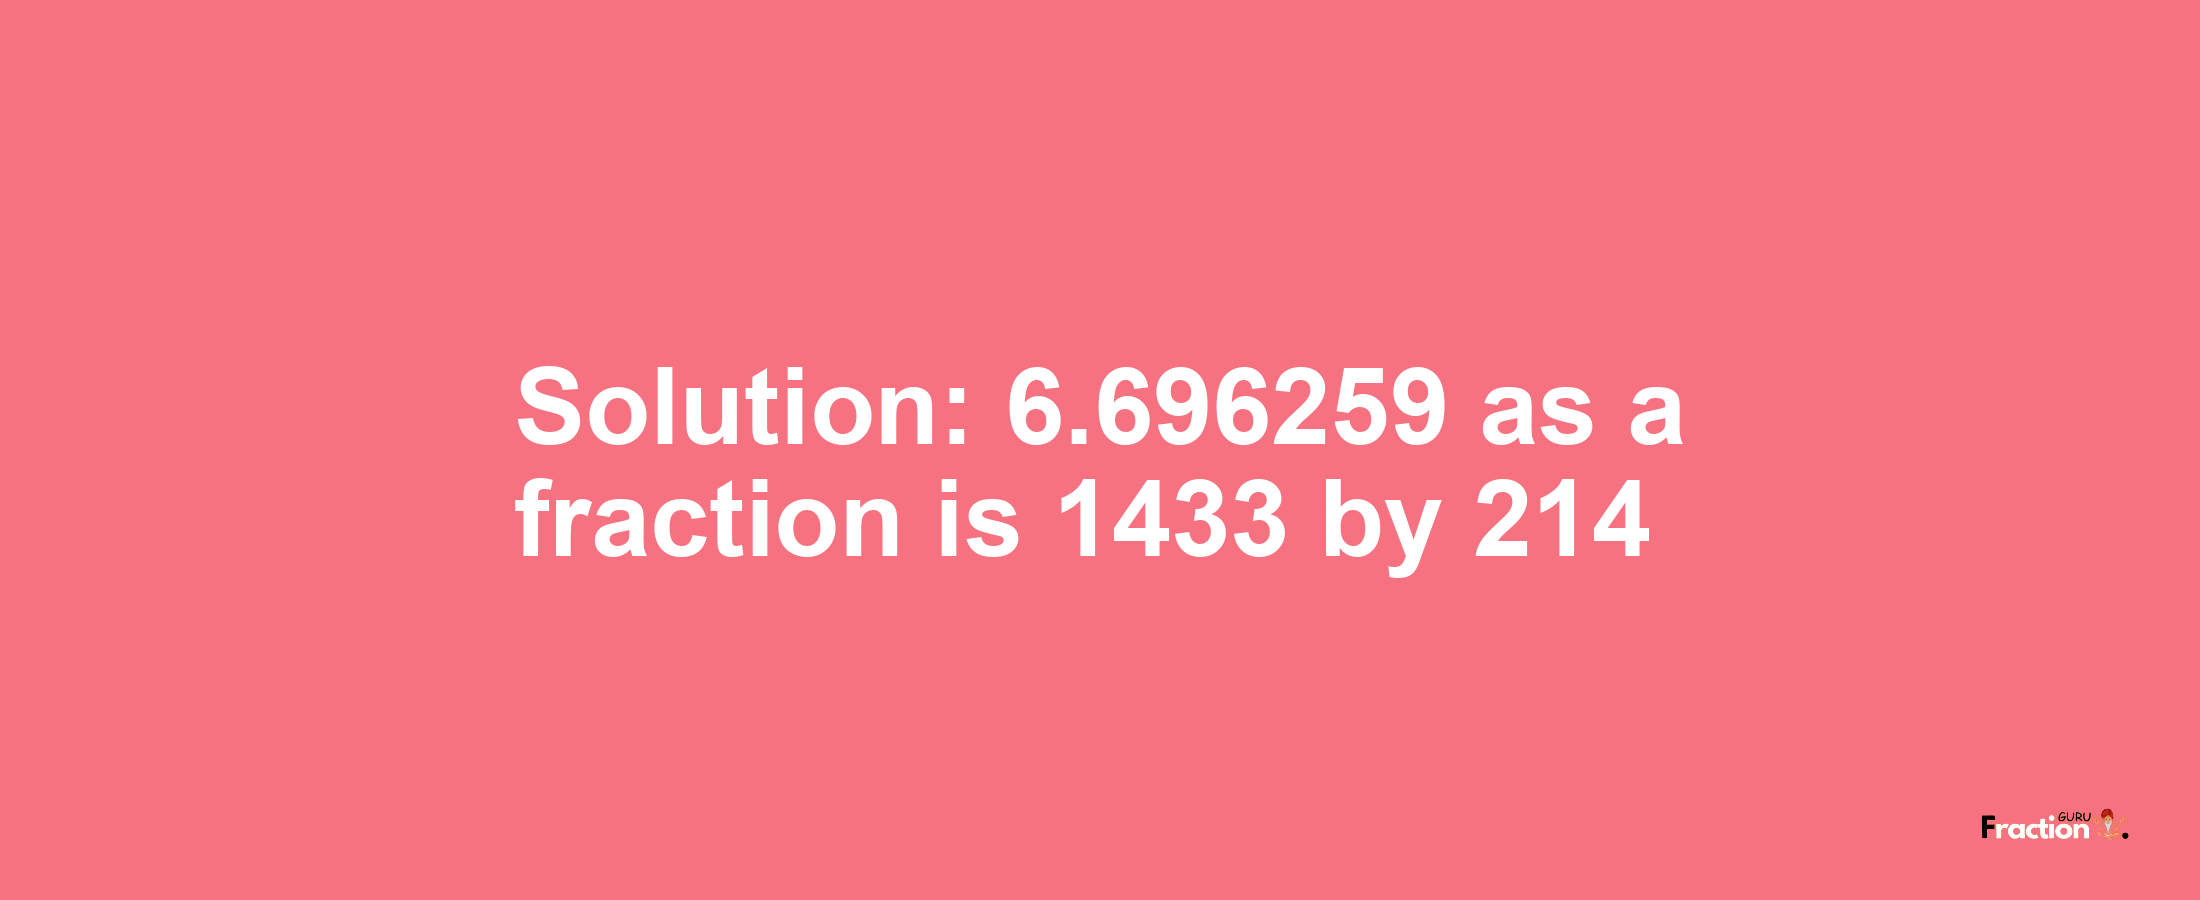 Solution:6.696259 as a fraction is 1433/214